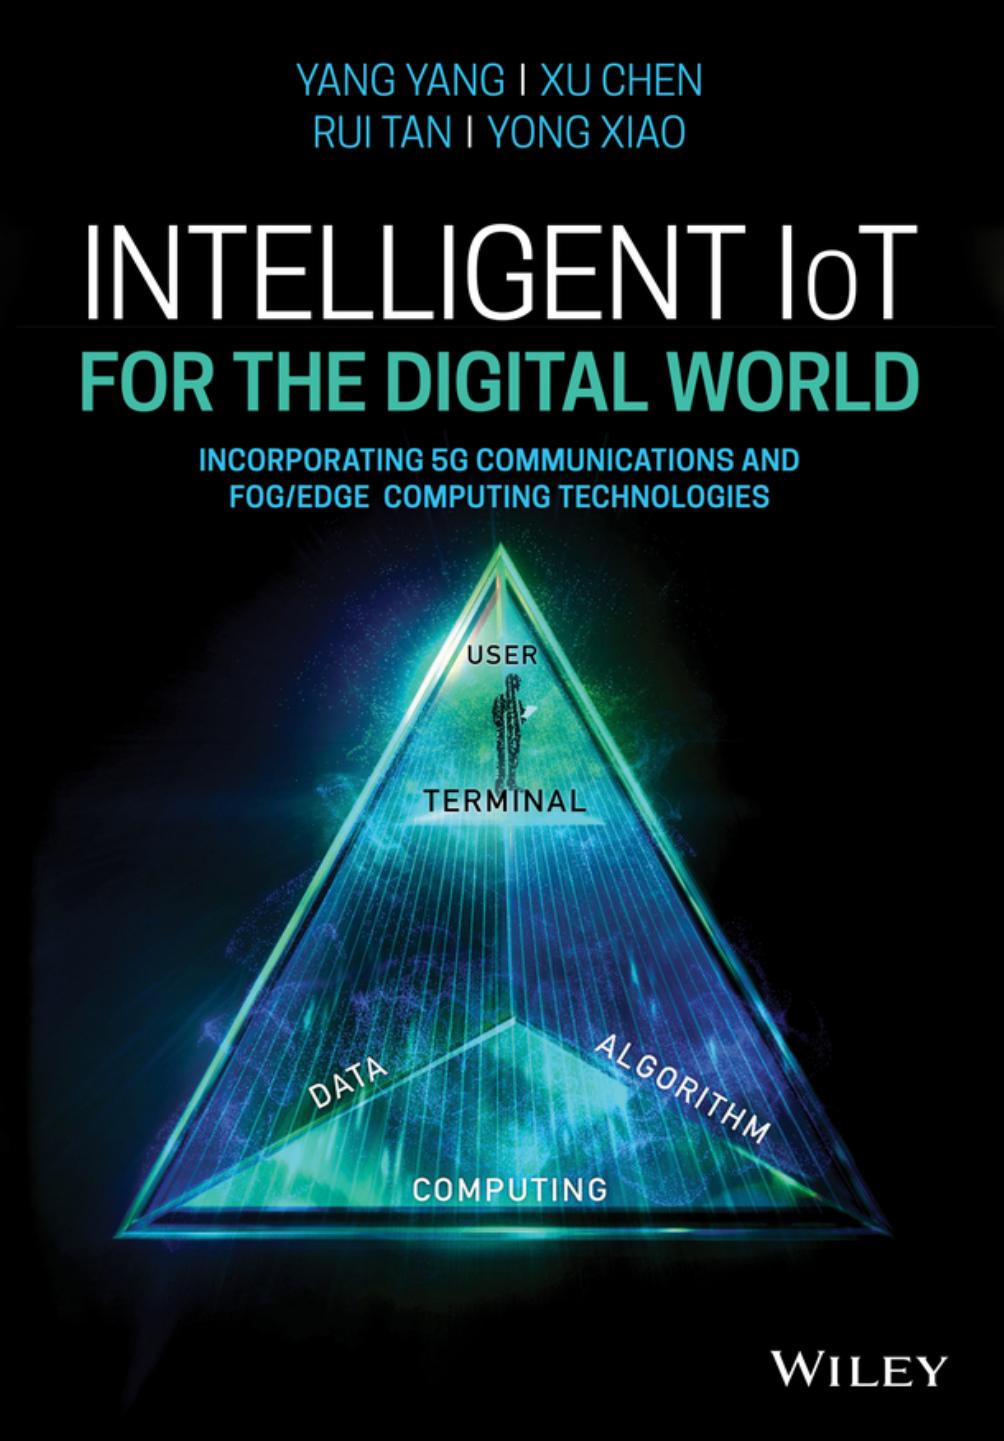 Intelligent IoT for the Digital World: Incorporating 5G Communications and Fog/Edge Computing Technologies